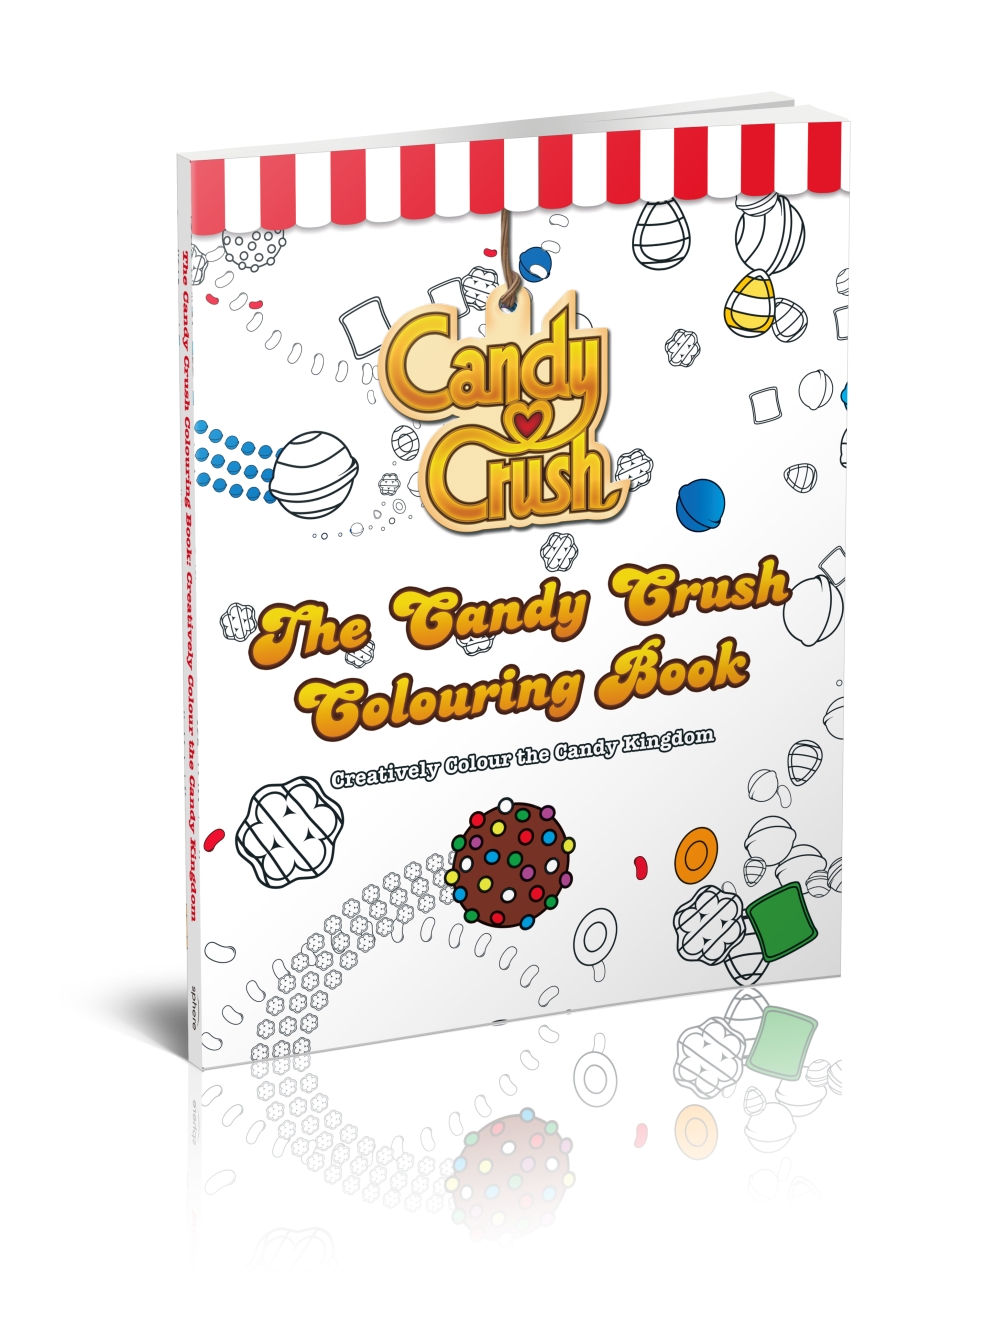 Inspired by the episodes and characters from the Candy Kingdom, the Candy Crush Coloring Book is beautifully intricate, featuring 'divine landscapes, sweet patterns and the delectable super-sweet Candies'. – AFP Relaxnews pic, September 30, 2015.